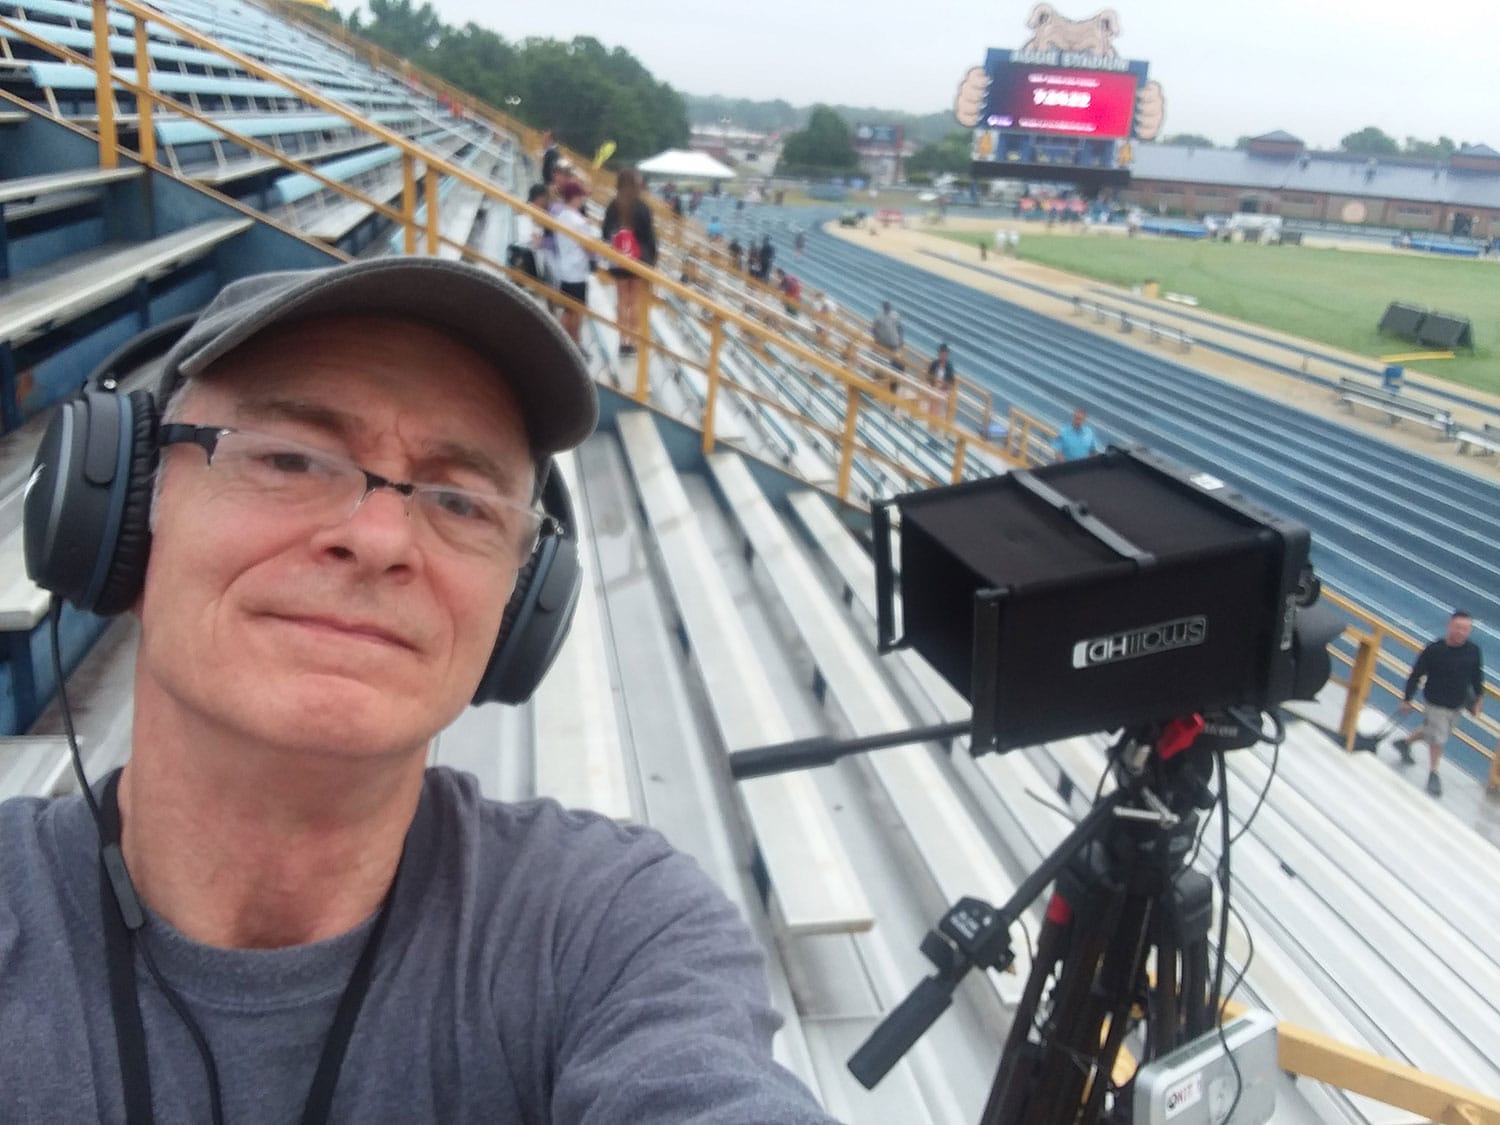 David L. Emerson on bleachers of sports arena, wearing headphones and standing next to camera equipment